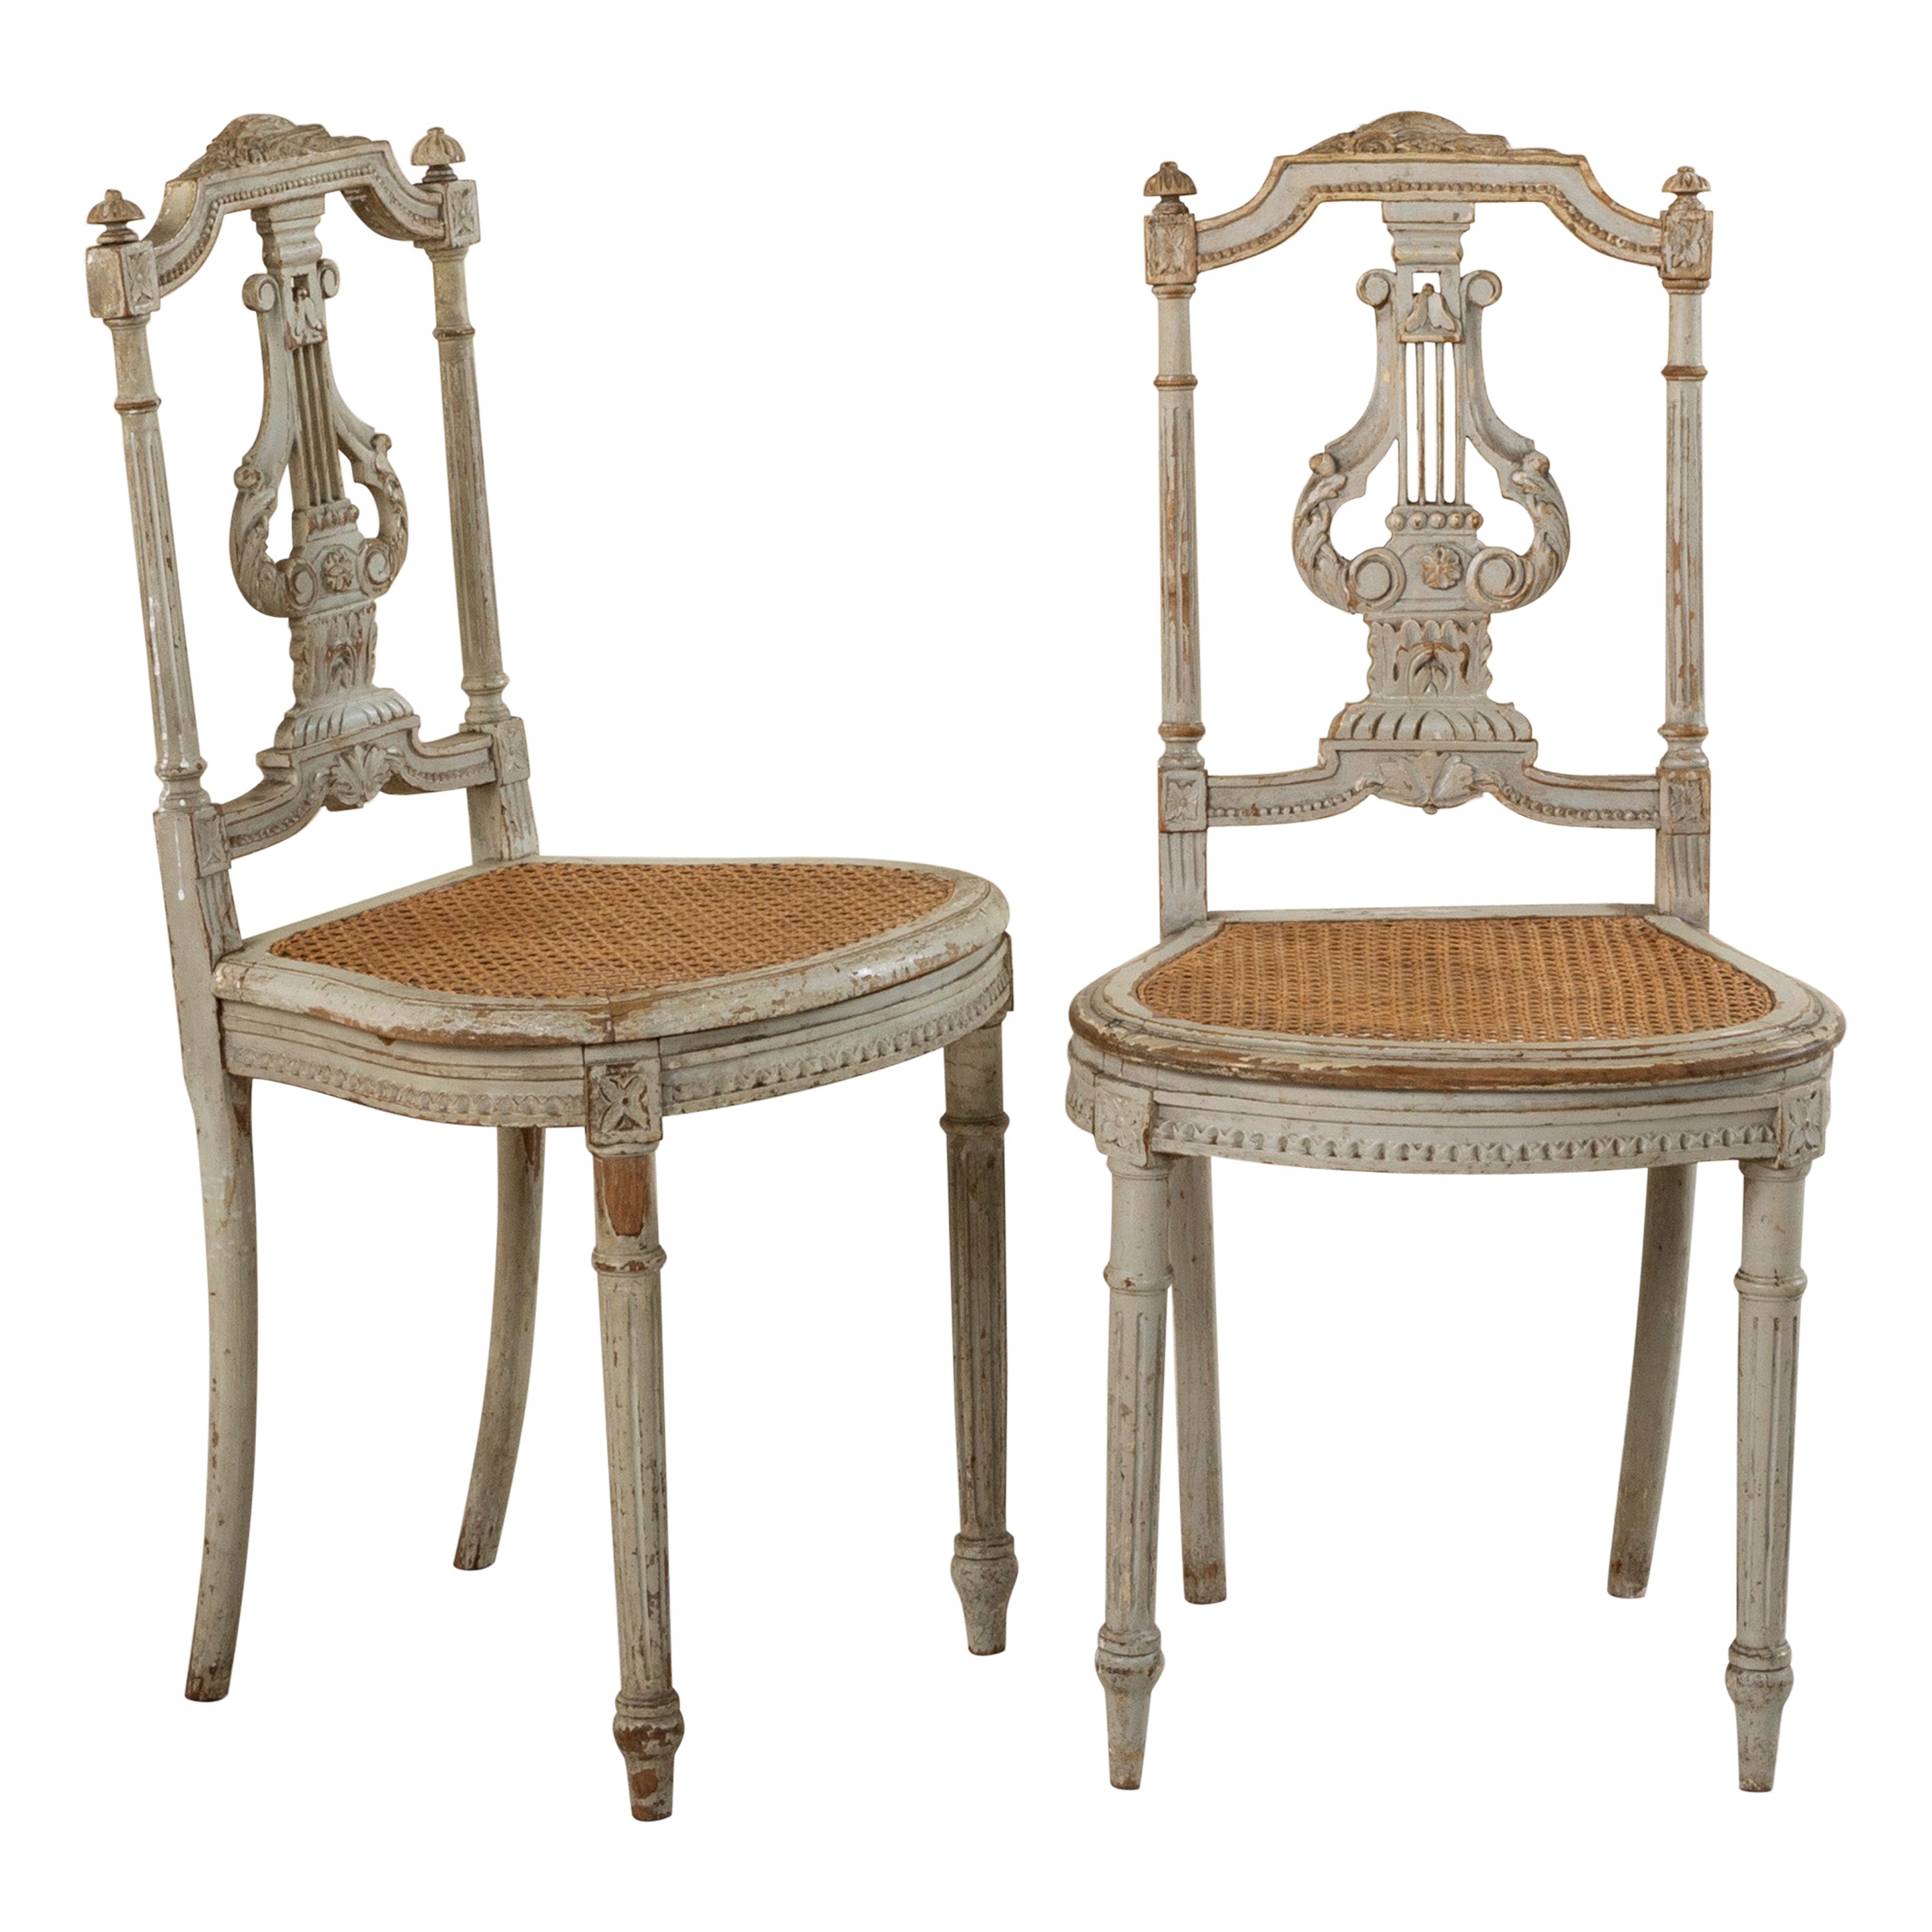 Pair of Mid-19th Century French Louis XVI Style Painted Opera Chairs Side Chairs